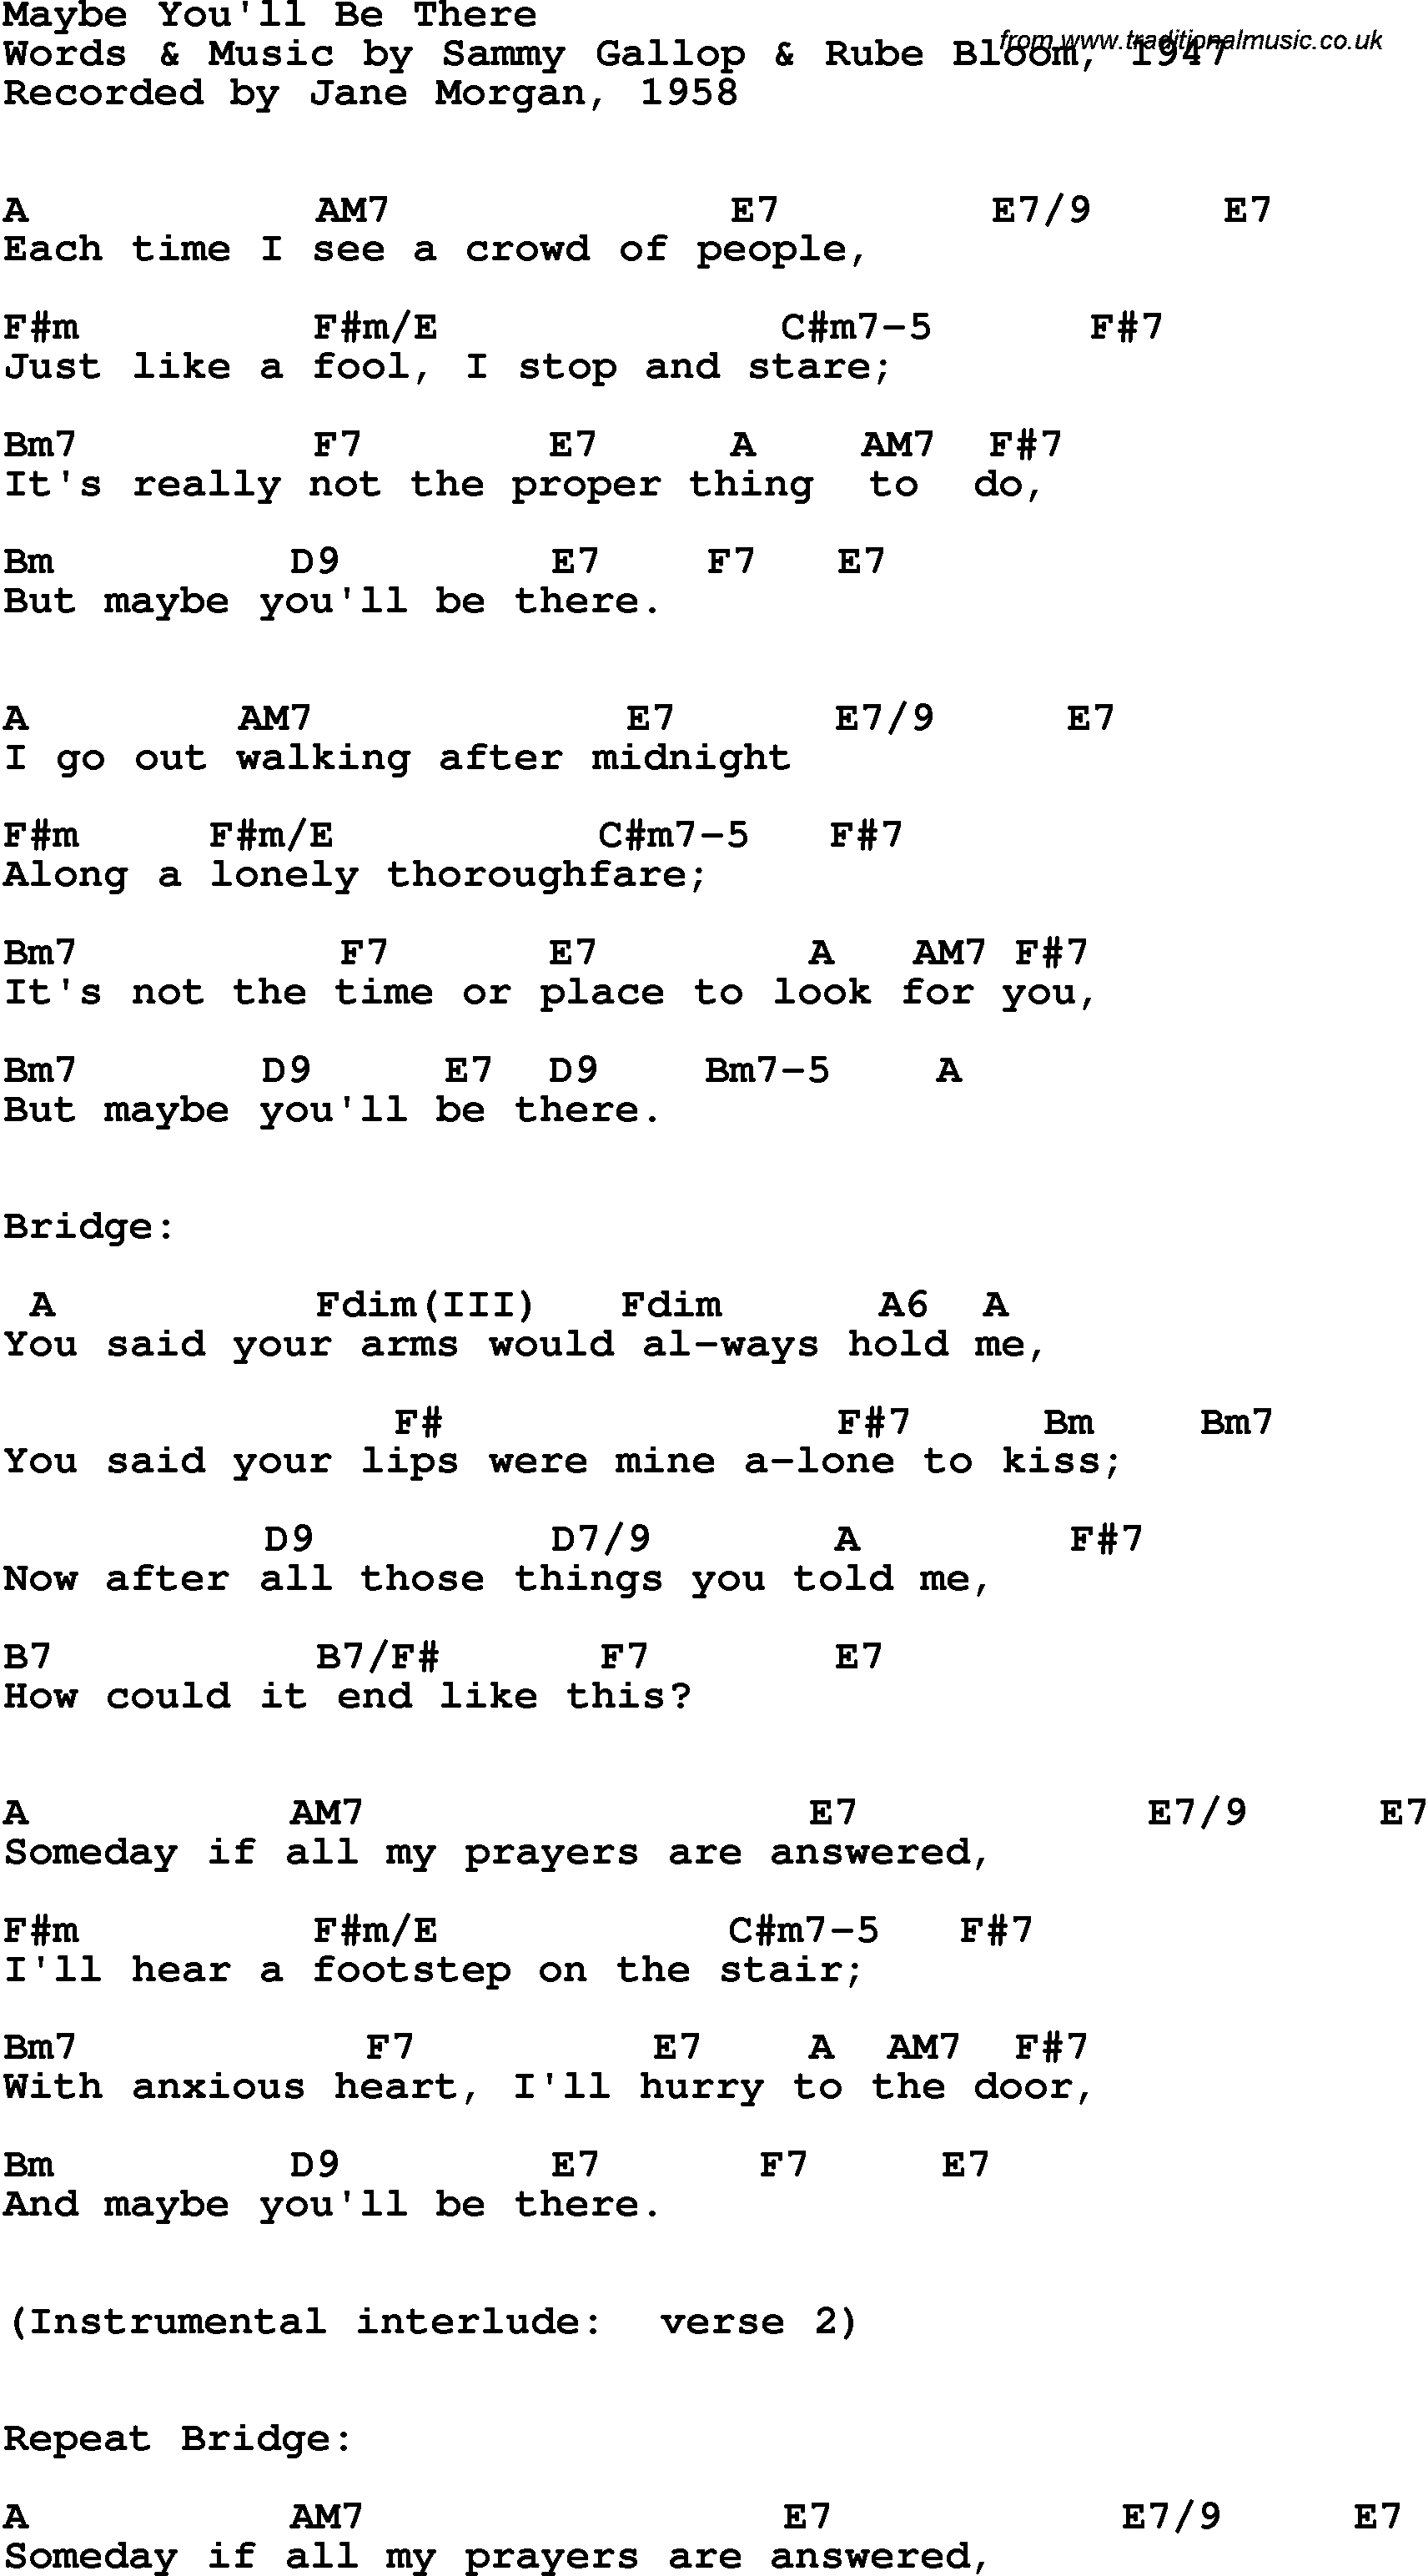 Song Lyrics with guitar chords for Maybe You'll Be There - Jane Morgan, 1958